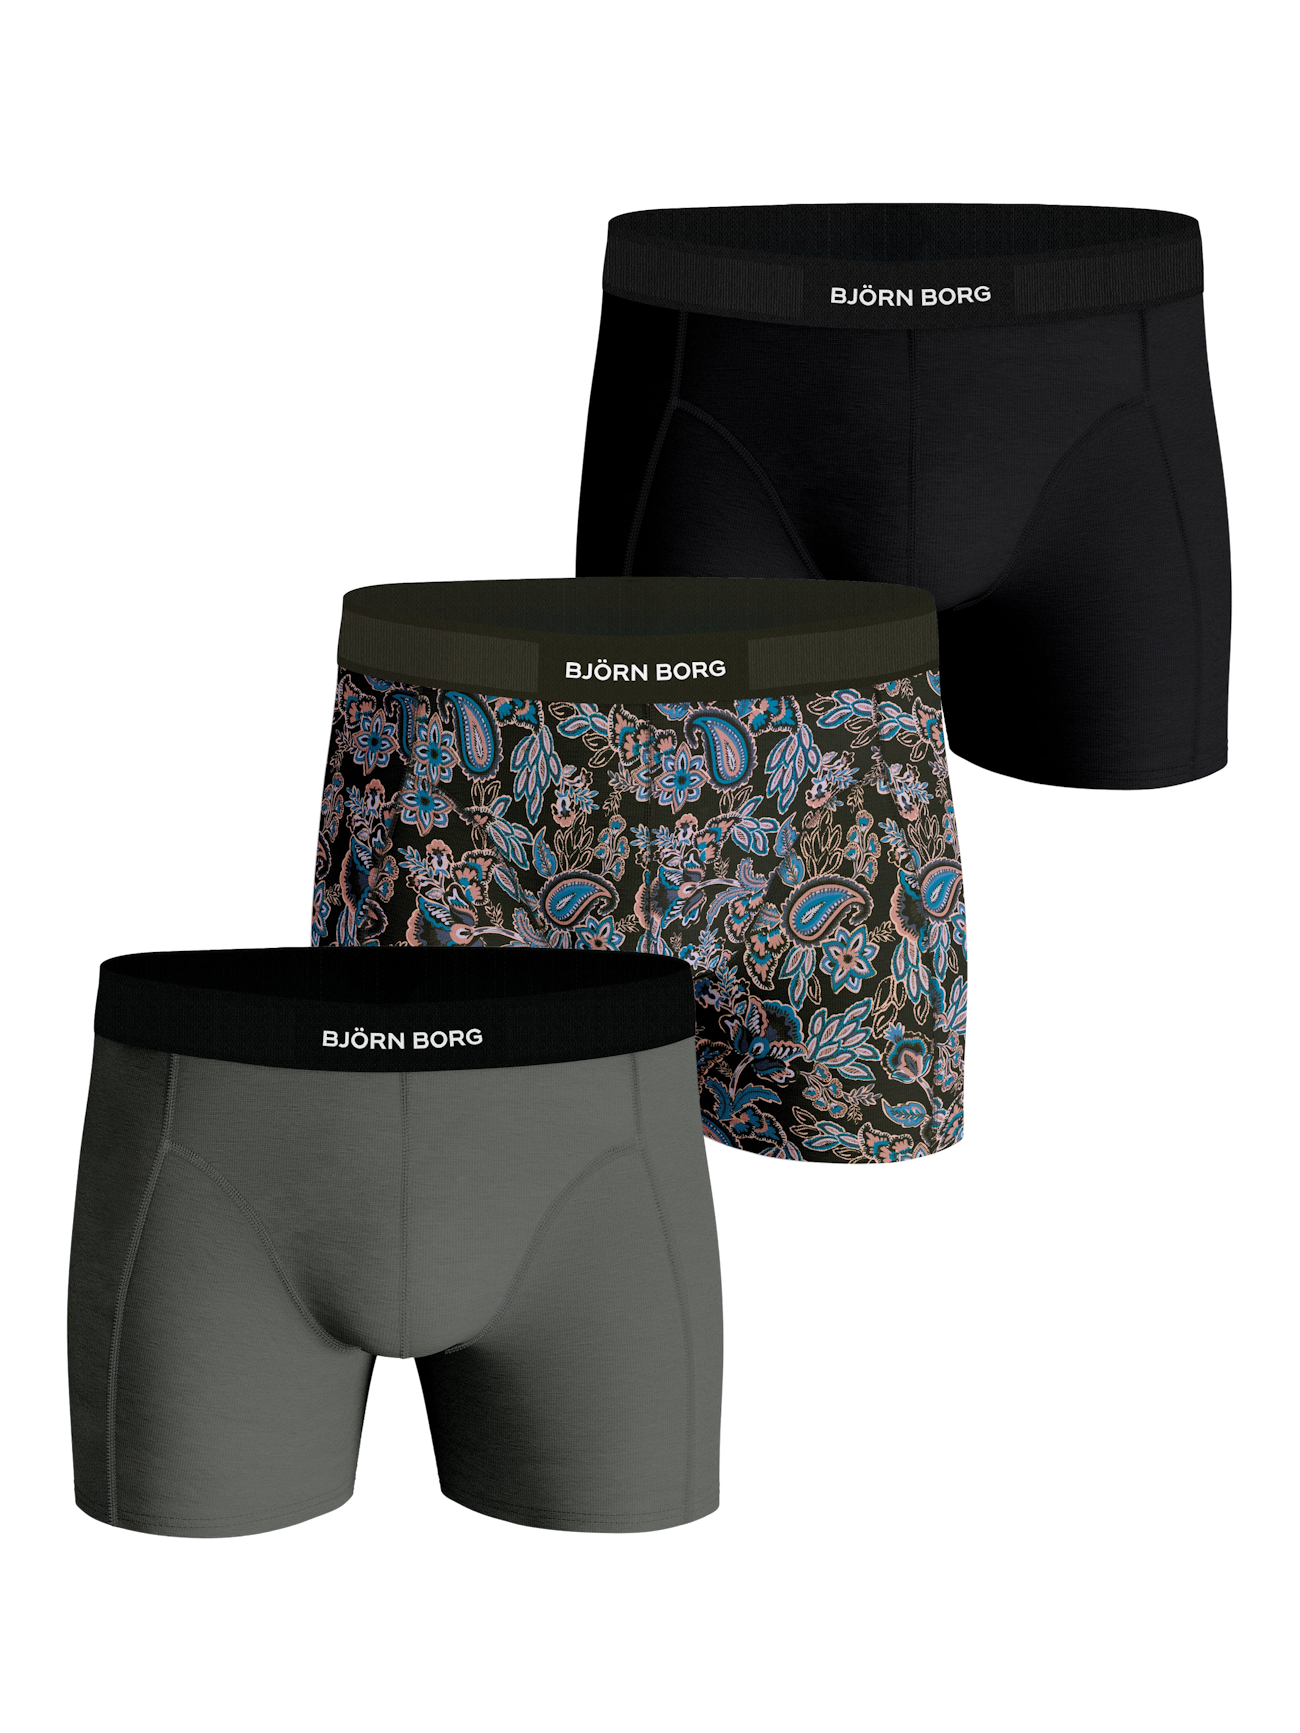 Bjorn Borg Iconic Briefs Sporting underwear review the Best briefs for  active men